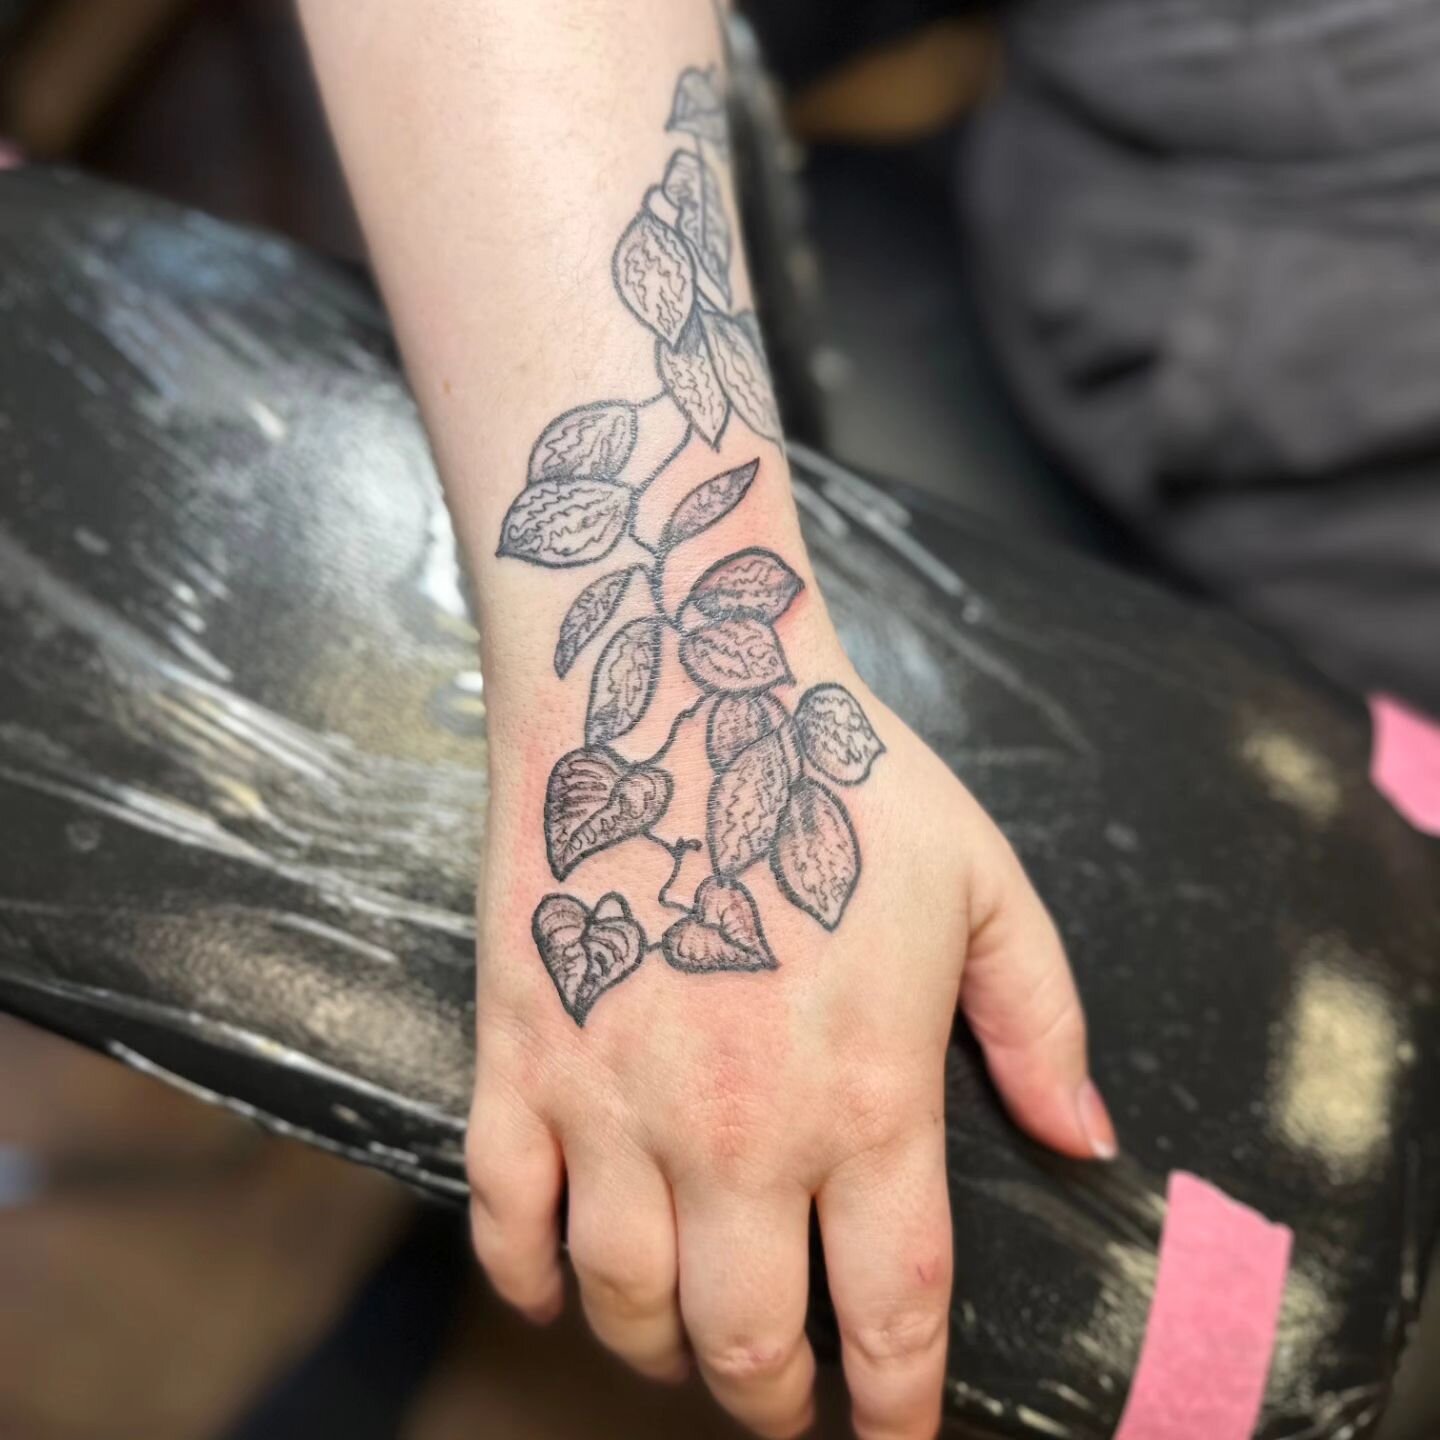 Simple, elegant and beautiful 😍. This add-on hand botanical for lz is all of the above and more. Maybe it's time to e-mail us about your next tattoo idea as well? 
.
.
Follow @rogue_tattoopgh
.
contact@roguetattoopgh.com
.
.
.
.
.
.
.
.

#412 #tatto